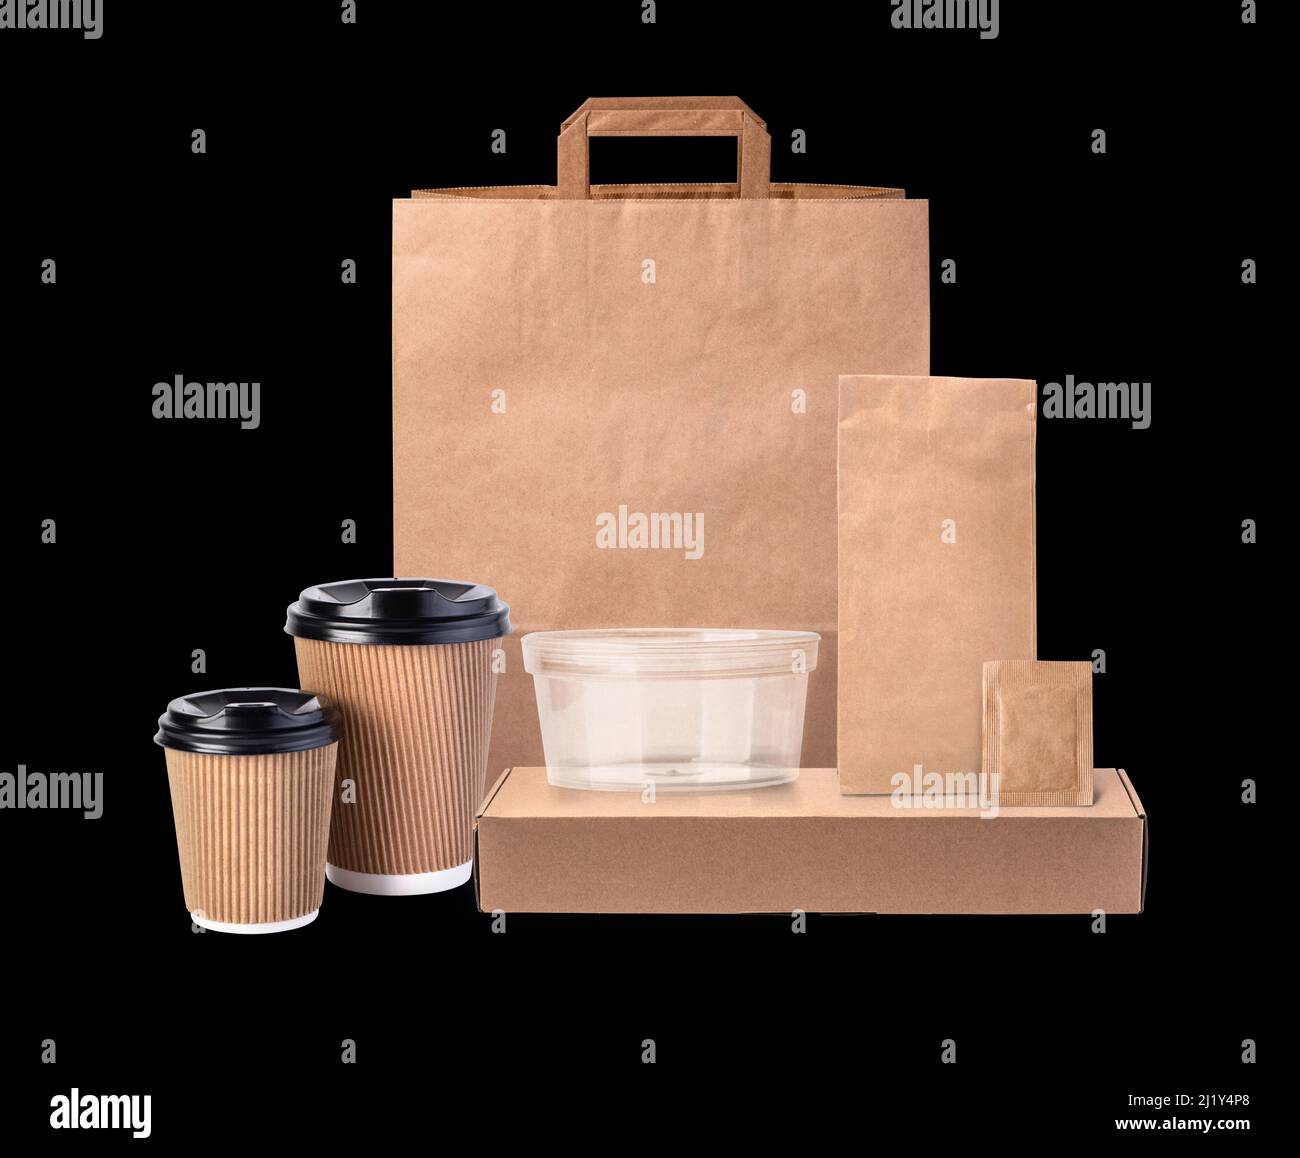 Cardboard packaging set. Pizza, burger and fast food delivery boxes and packs, blank shopping bags. Disposable coffe cup, takeaway package mockups. Stock Photo